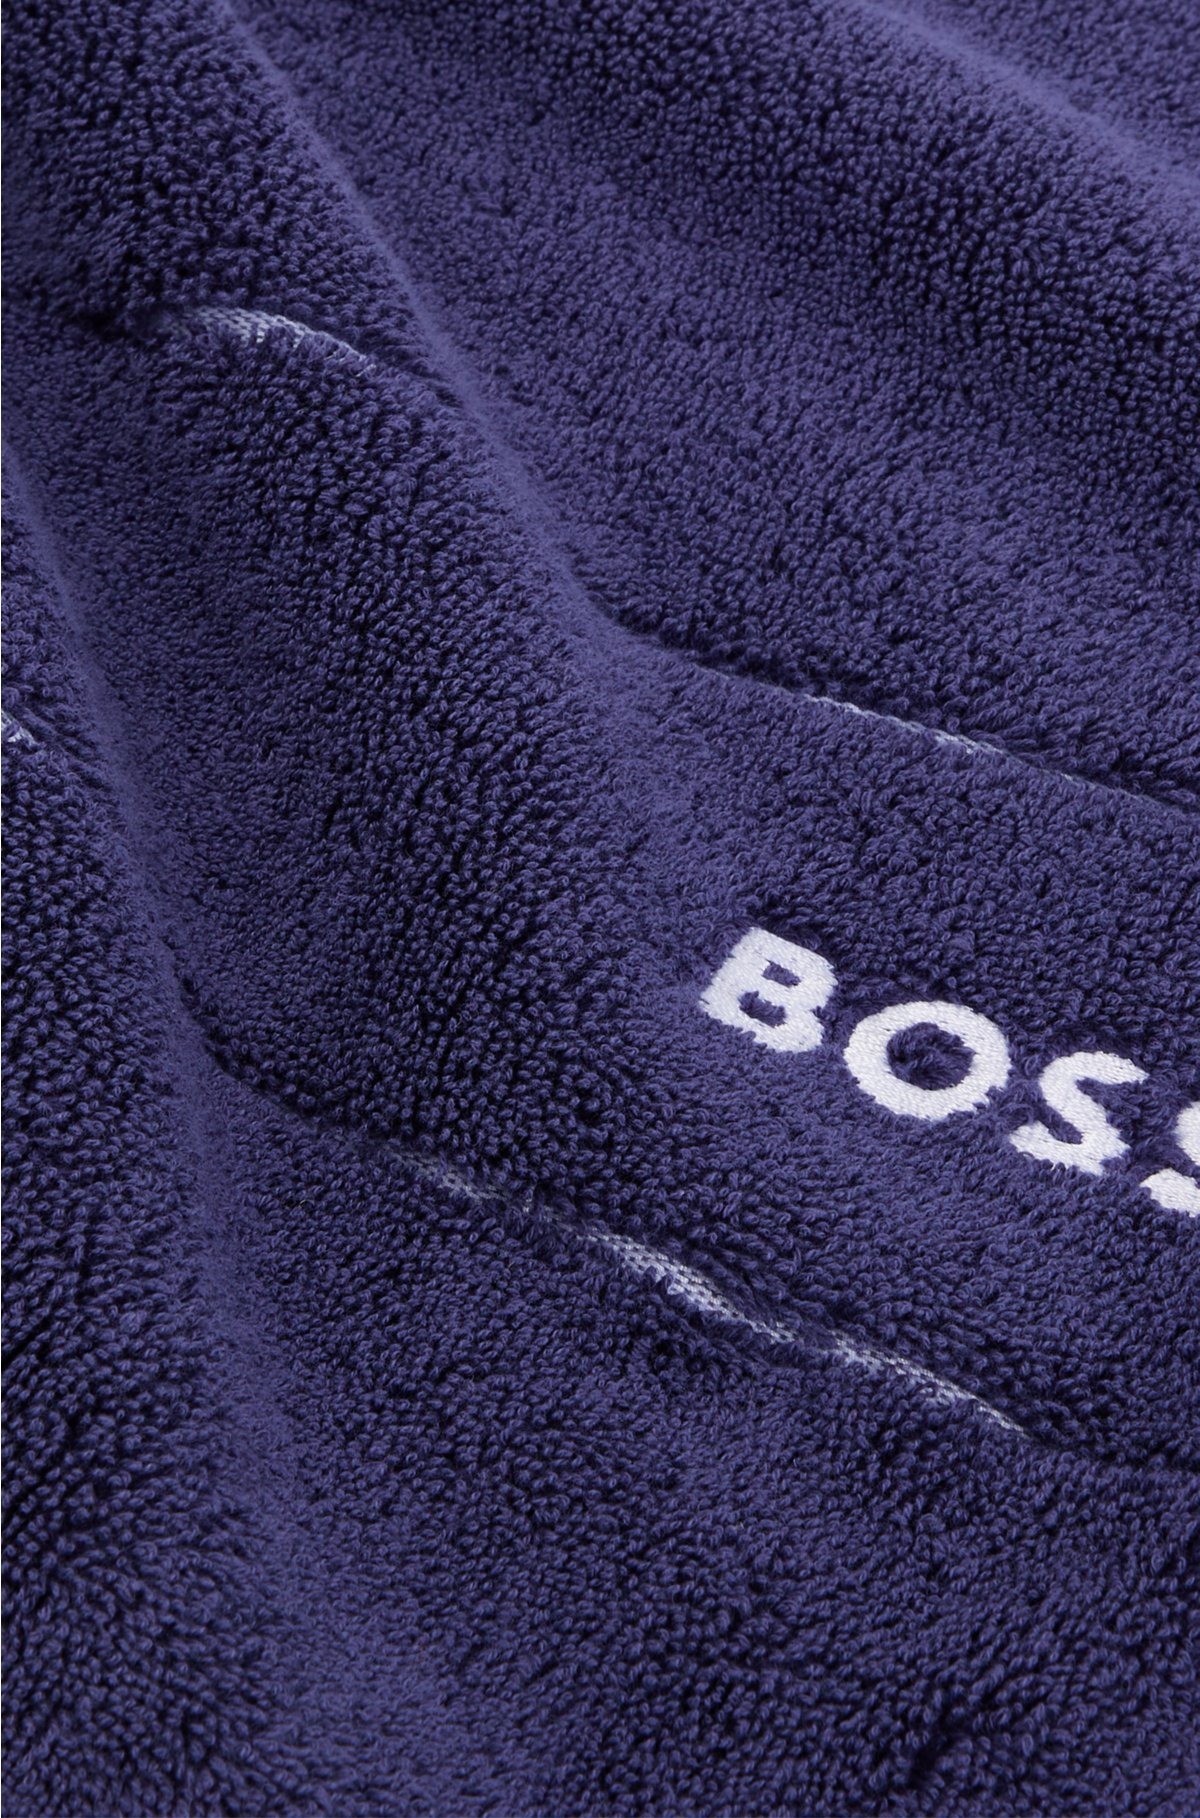 Cotton bath mat with contrast logo embroidery, Dark Blue